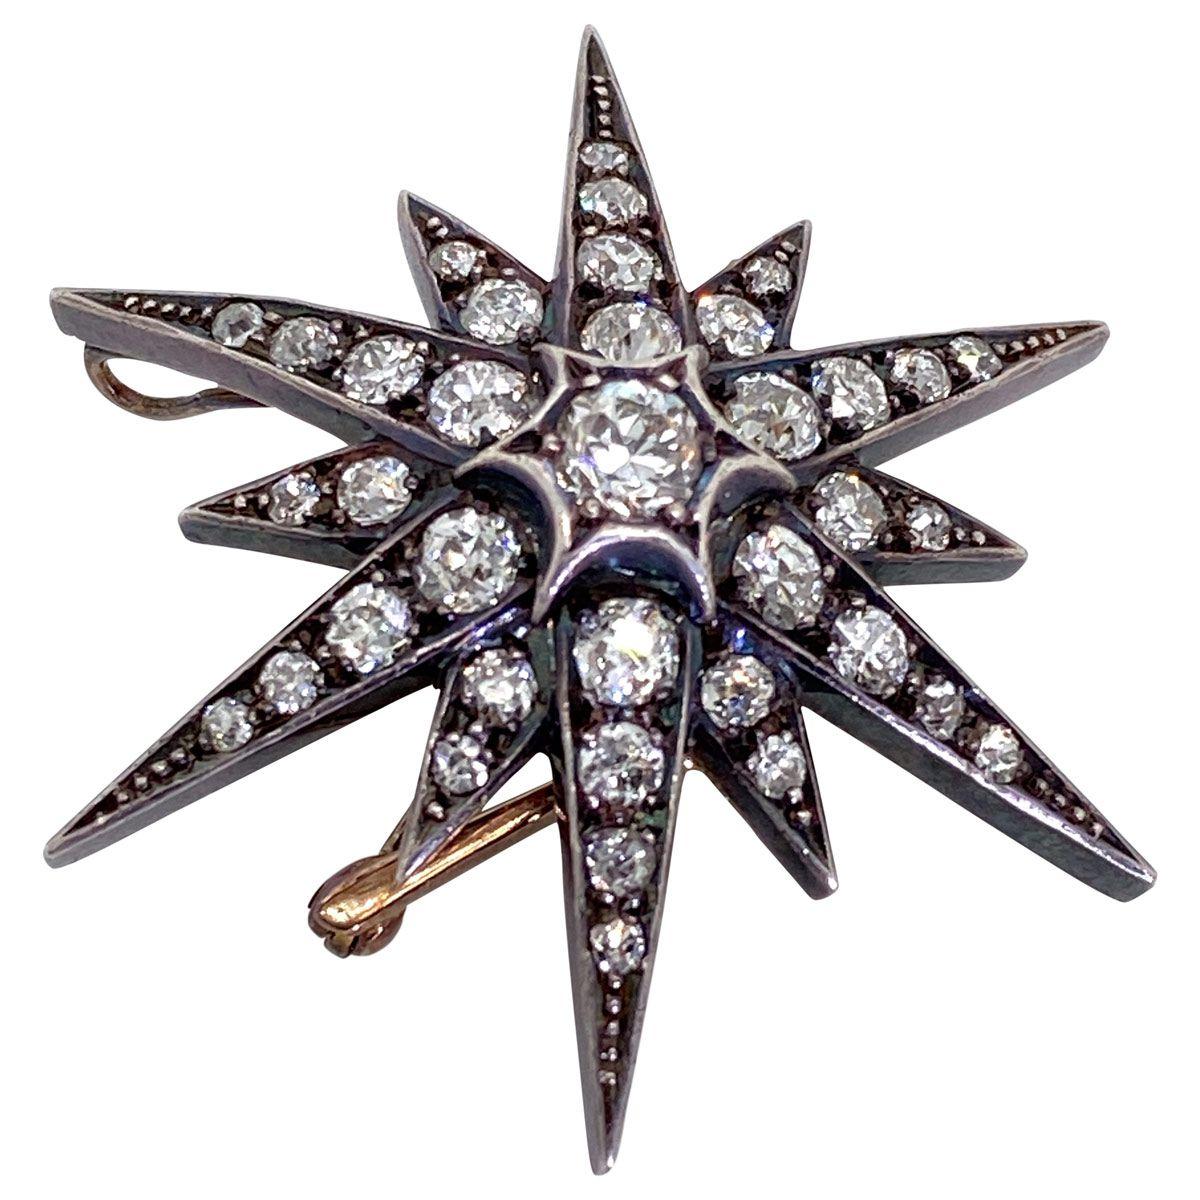 A beautiful example of original Victorian jewellery - this stunning six point Starburst Pin / Pendant dates back to the 1880's when jewellery was worn and showcased on a daily basis. This gorgeous style is so popular, making a return to fashion in